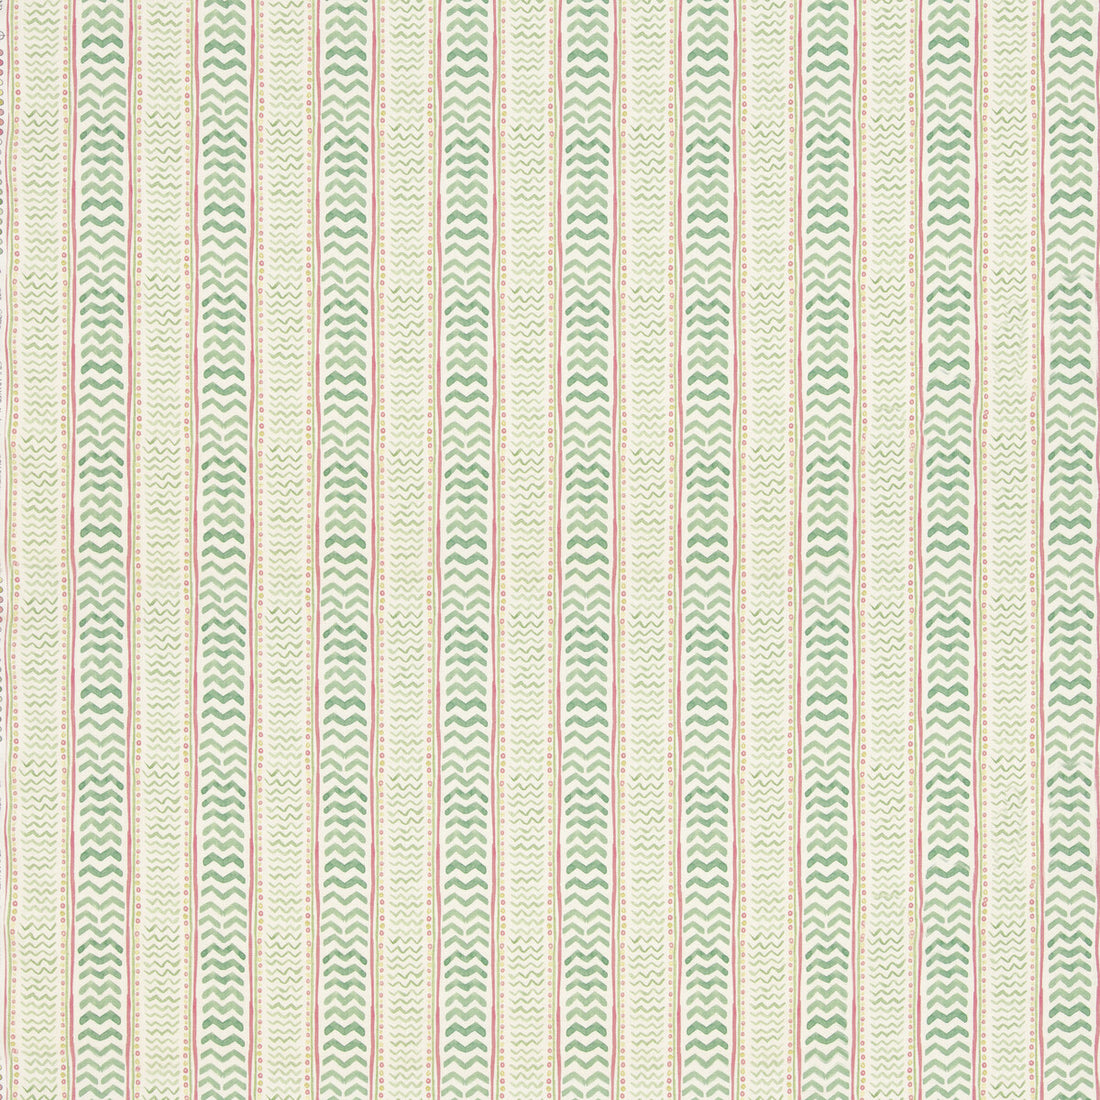 Wriggle Room fabric in green/pink color - pattern BP11050.3.0 - by G P &amp; J Baker in the X Kit Kemp Prints And Embroideries collection